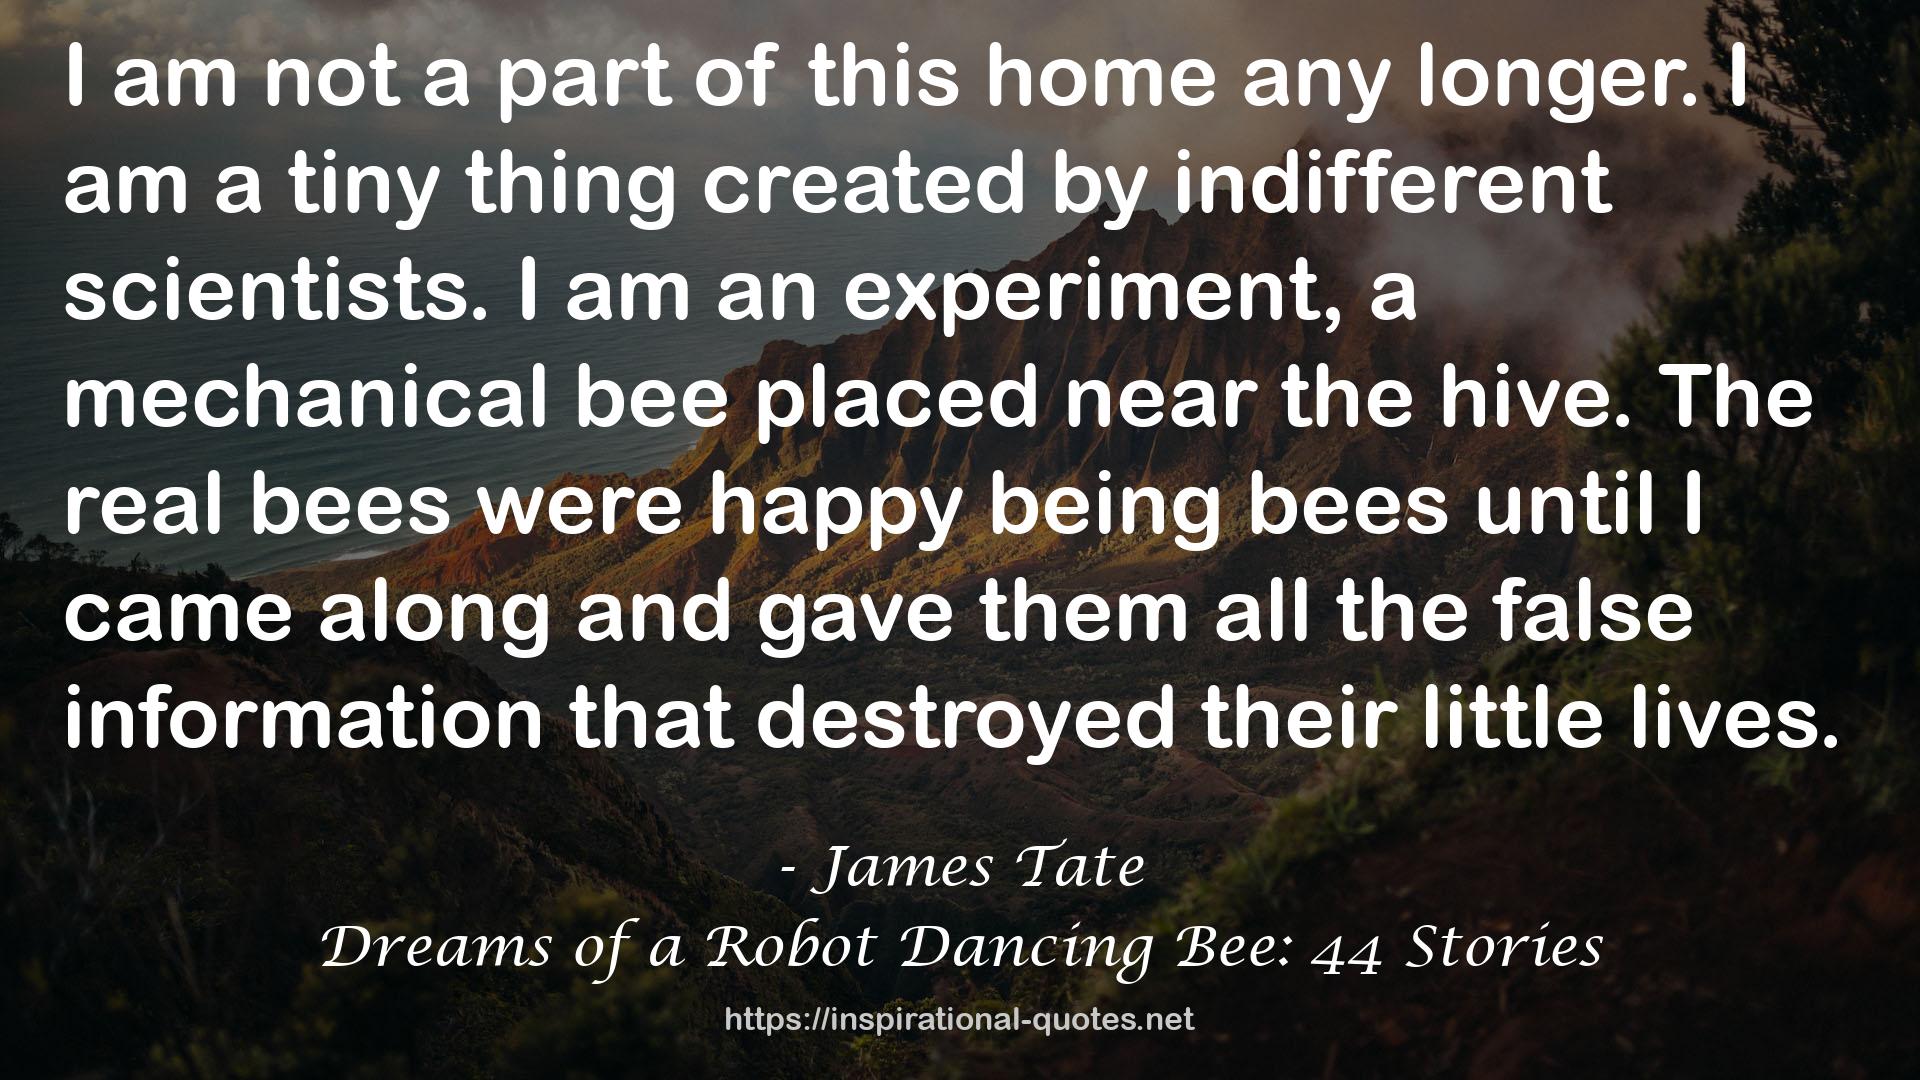 Dreams of a Robot Dancing Bee: 44 Stories QUOTES